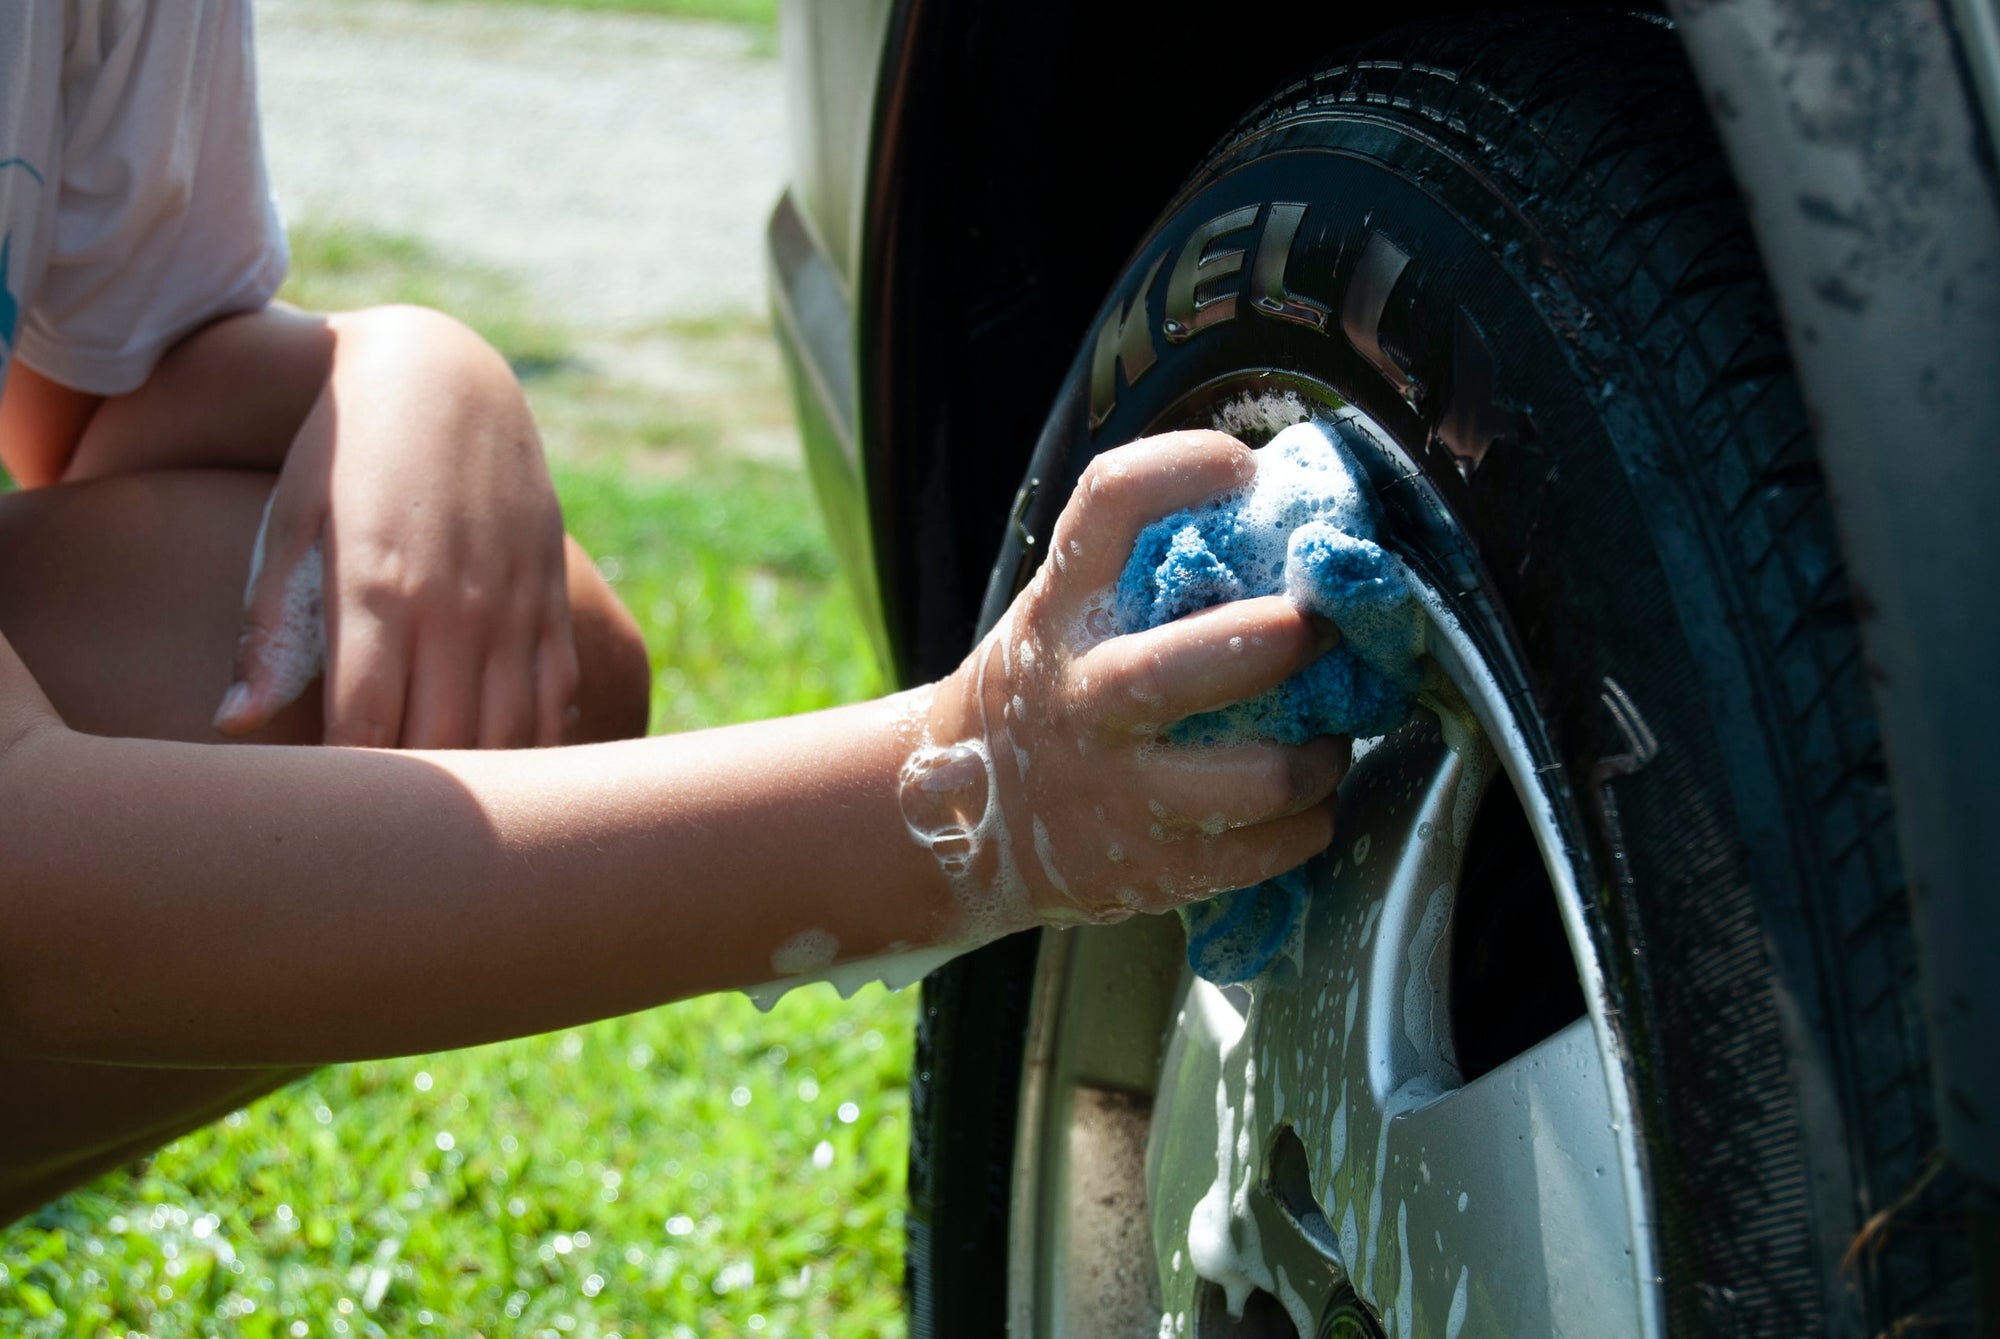 Is Soft Water Good For Washing Cars?